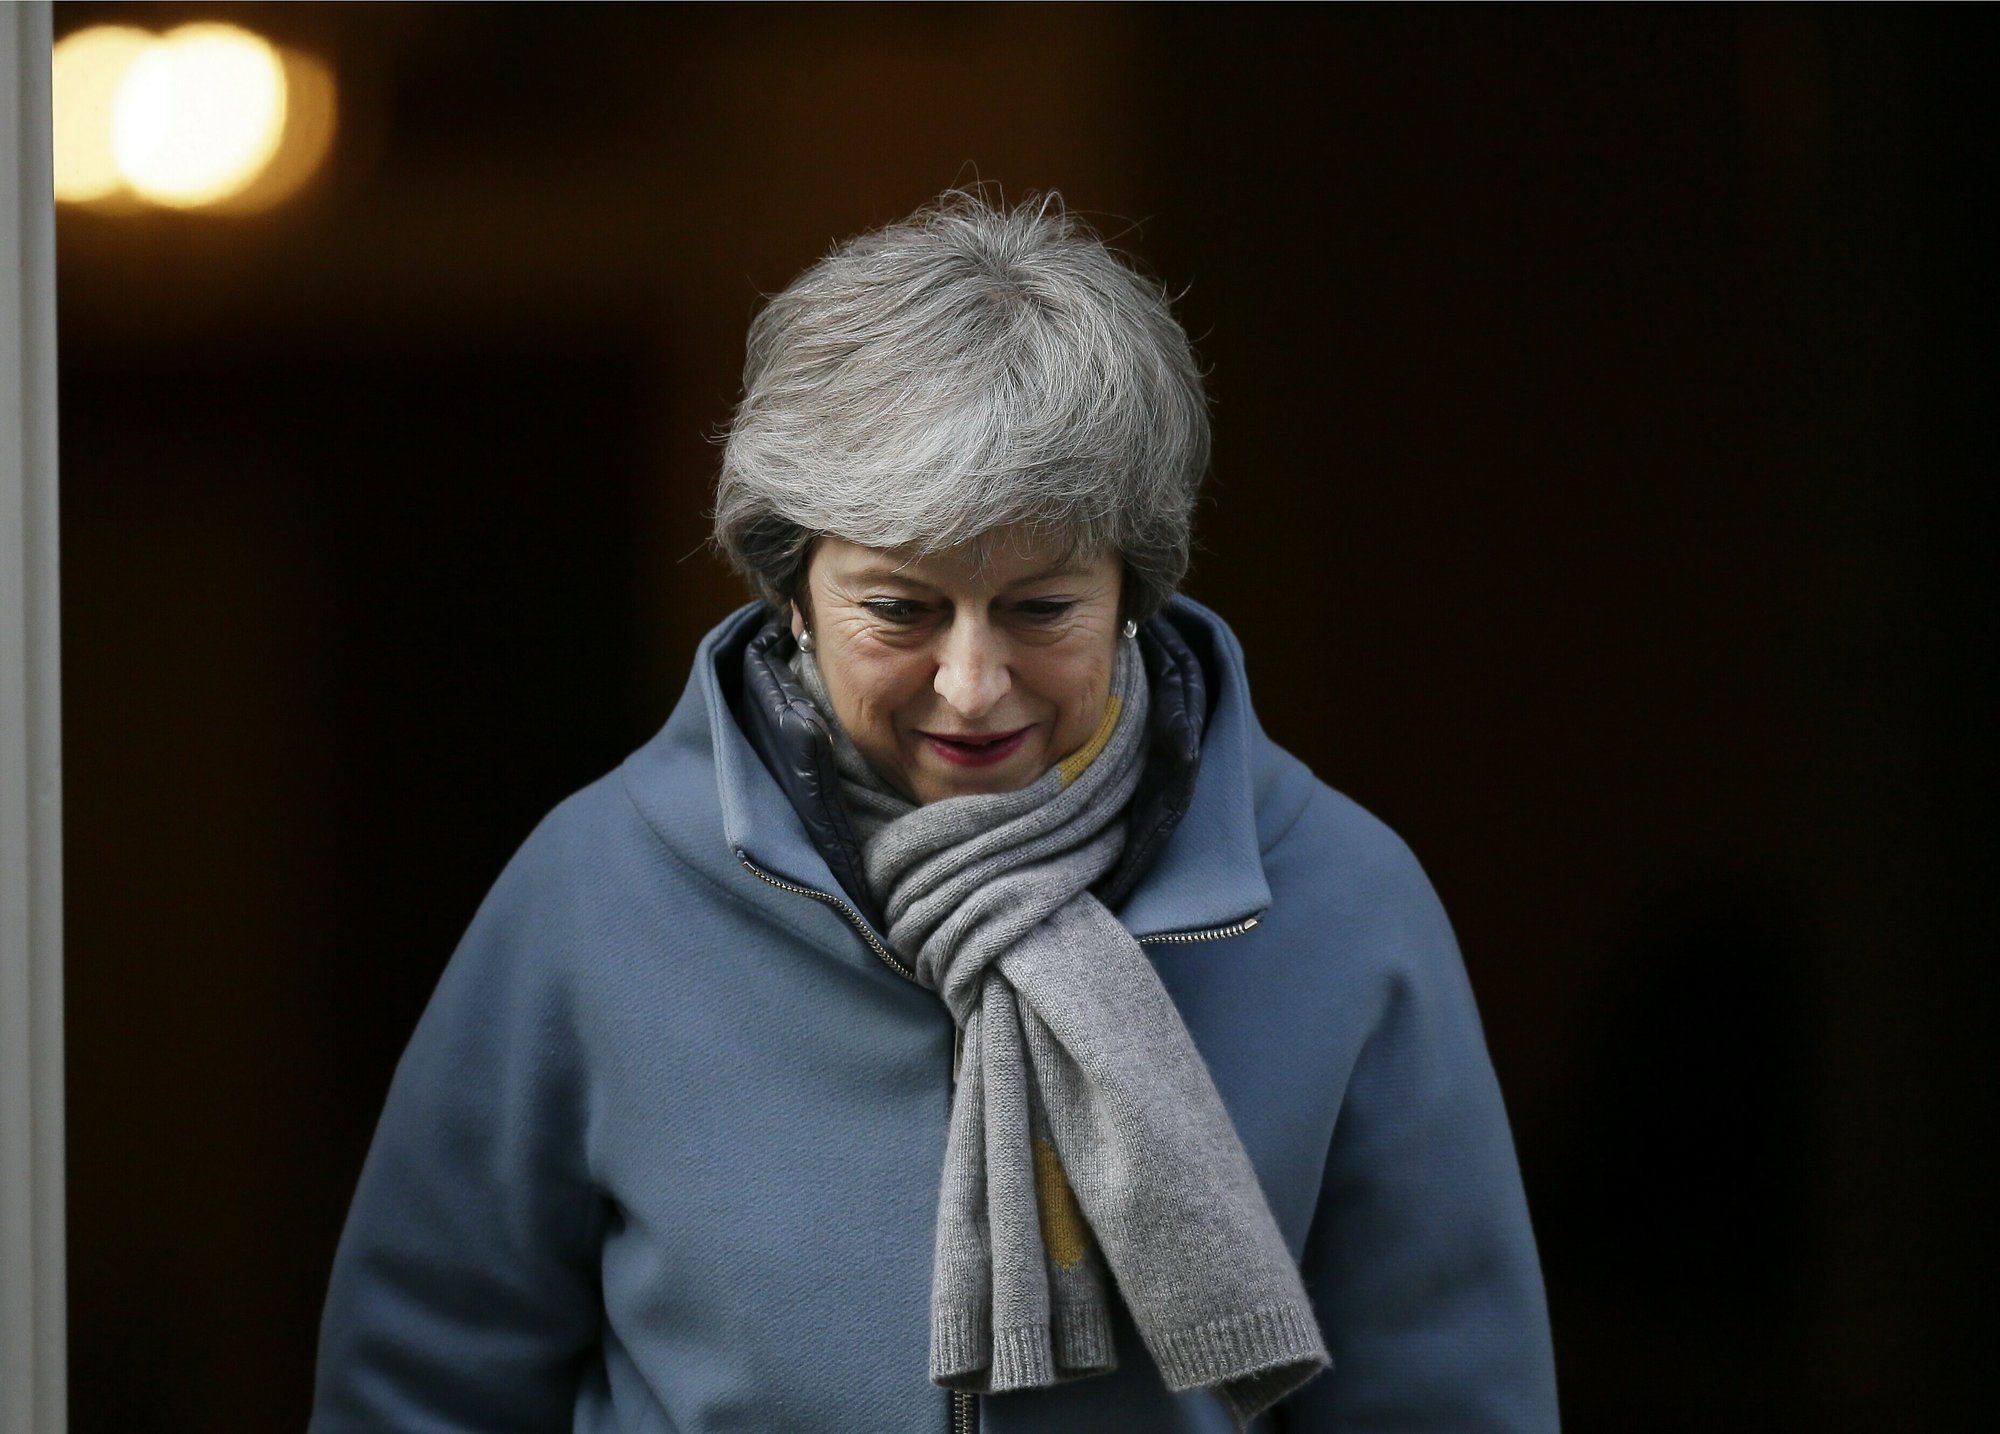 Britain's Prime Minister Theresa May leaves 10 Downing street in London, Thursday, March 14, 2019. British lawmakers faced another tumultuous day Thursday, as Parliament prepared to vote on whether to request a delay to the country's scheduled departure from the European Union and Prime Minister Theresa May struggled to shore up her shattered authority. (AP Photo/Tim Ireland)